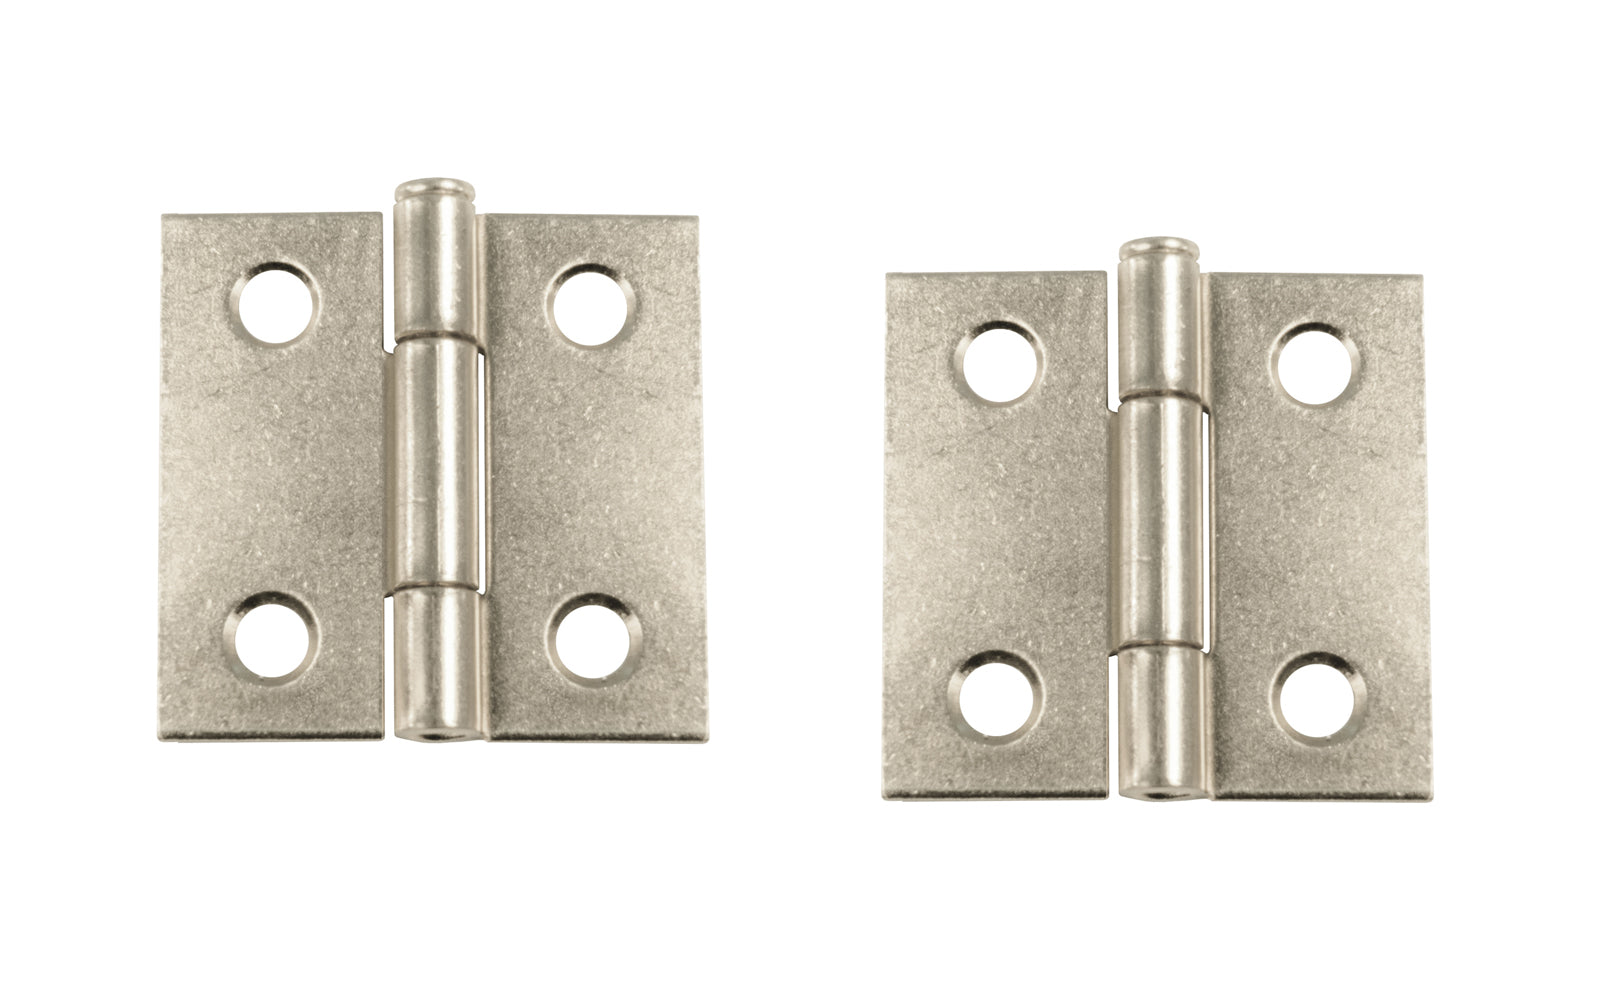 Traditional & classic plated steel butt cabinet hinges with loose pins. Removable hinge pins. 1-1/2" high x 1-1/2" wide. 1/16" leaf thickness gauge. Sold as a pair of hinges. Polished Nickel Finish.